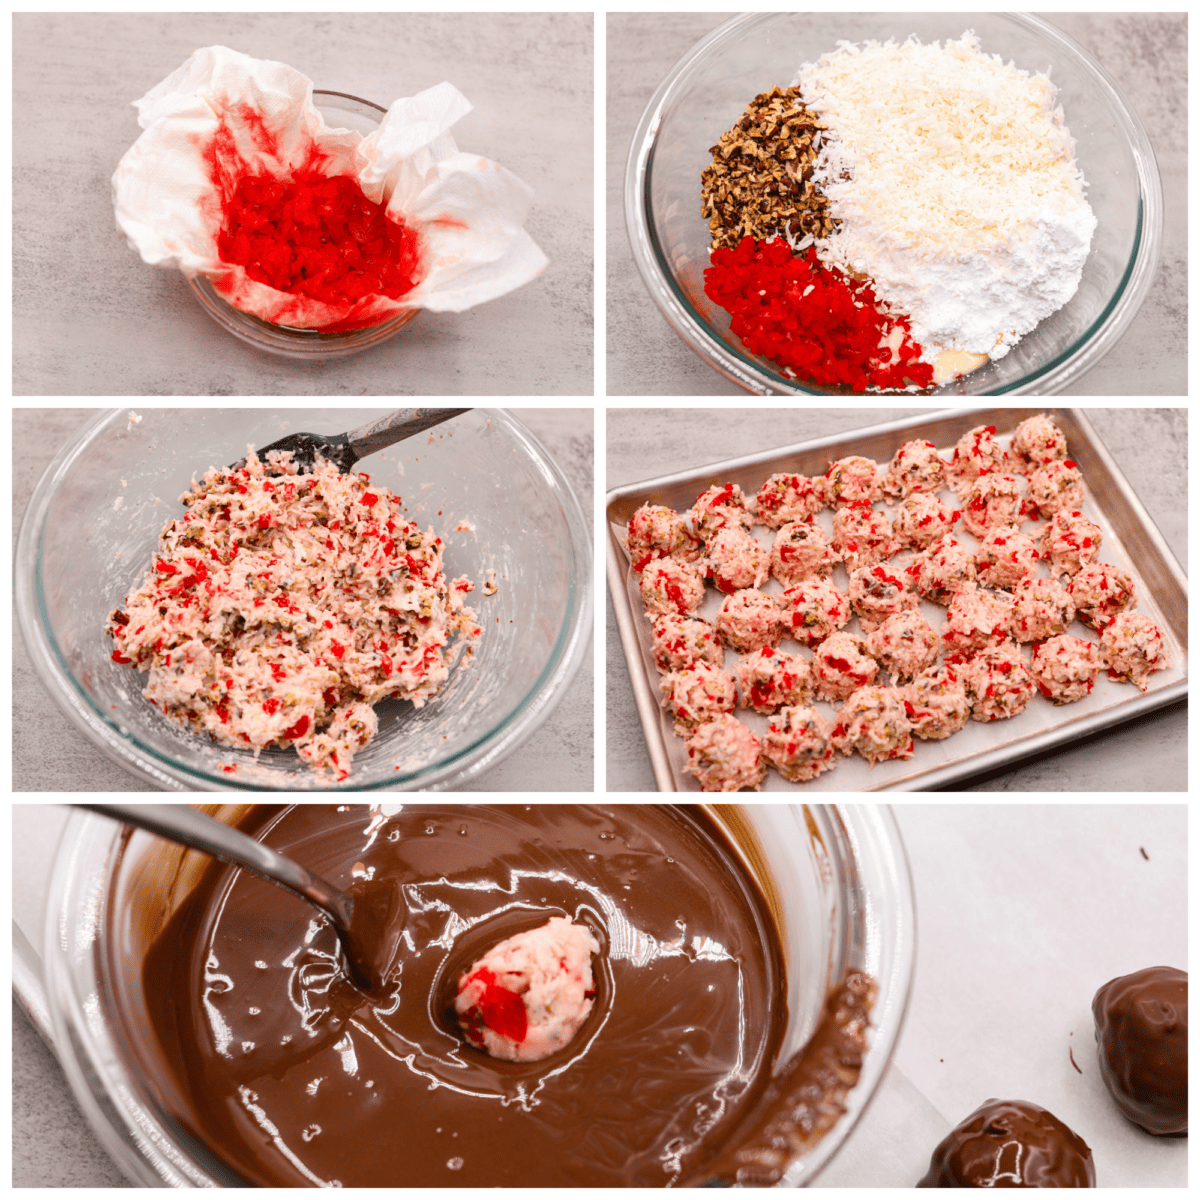 5-photo collage of the chocolate-coated cherry truffles being prepared.